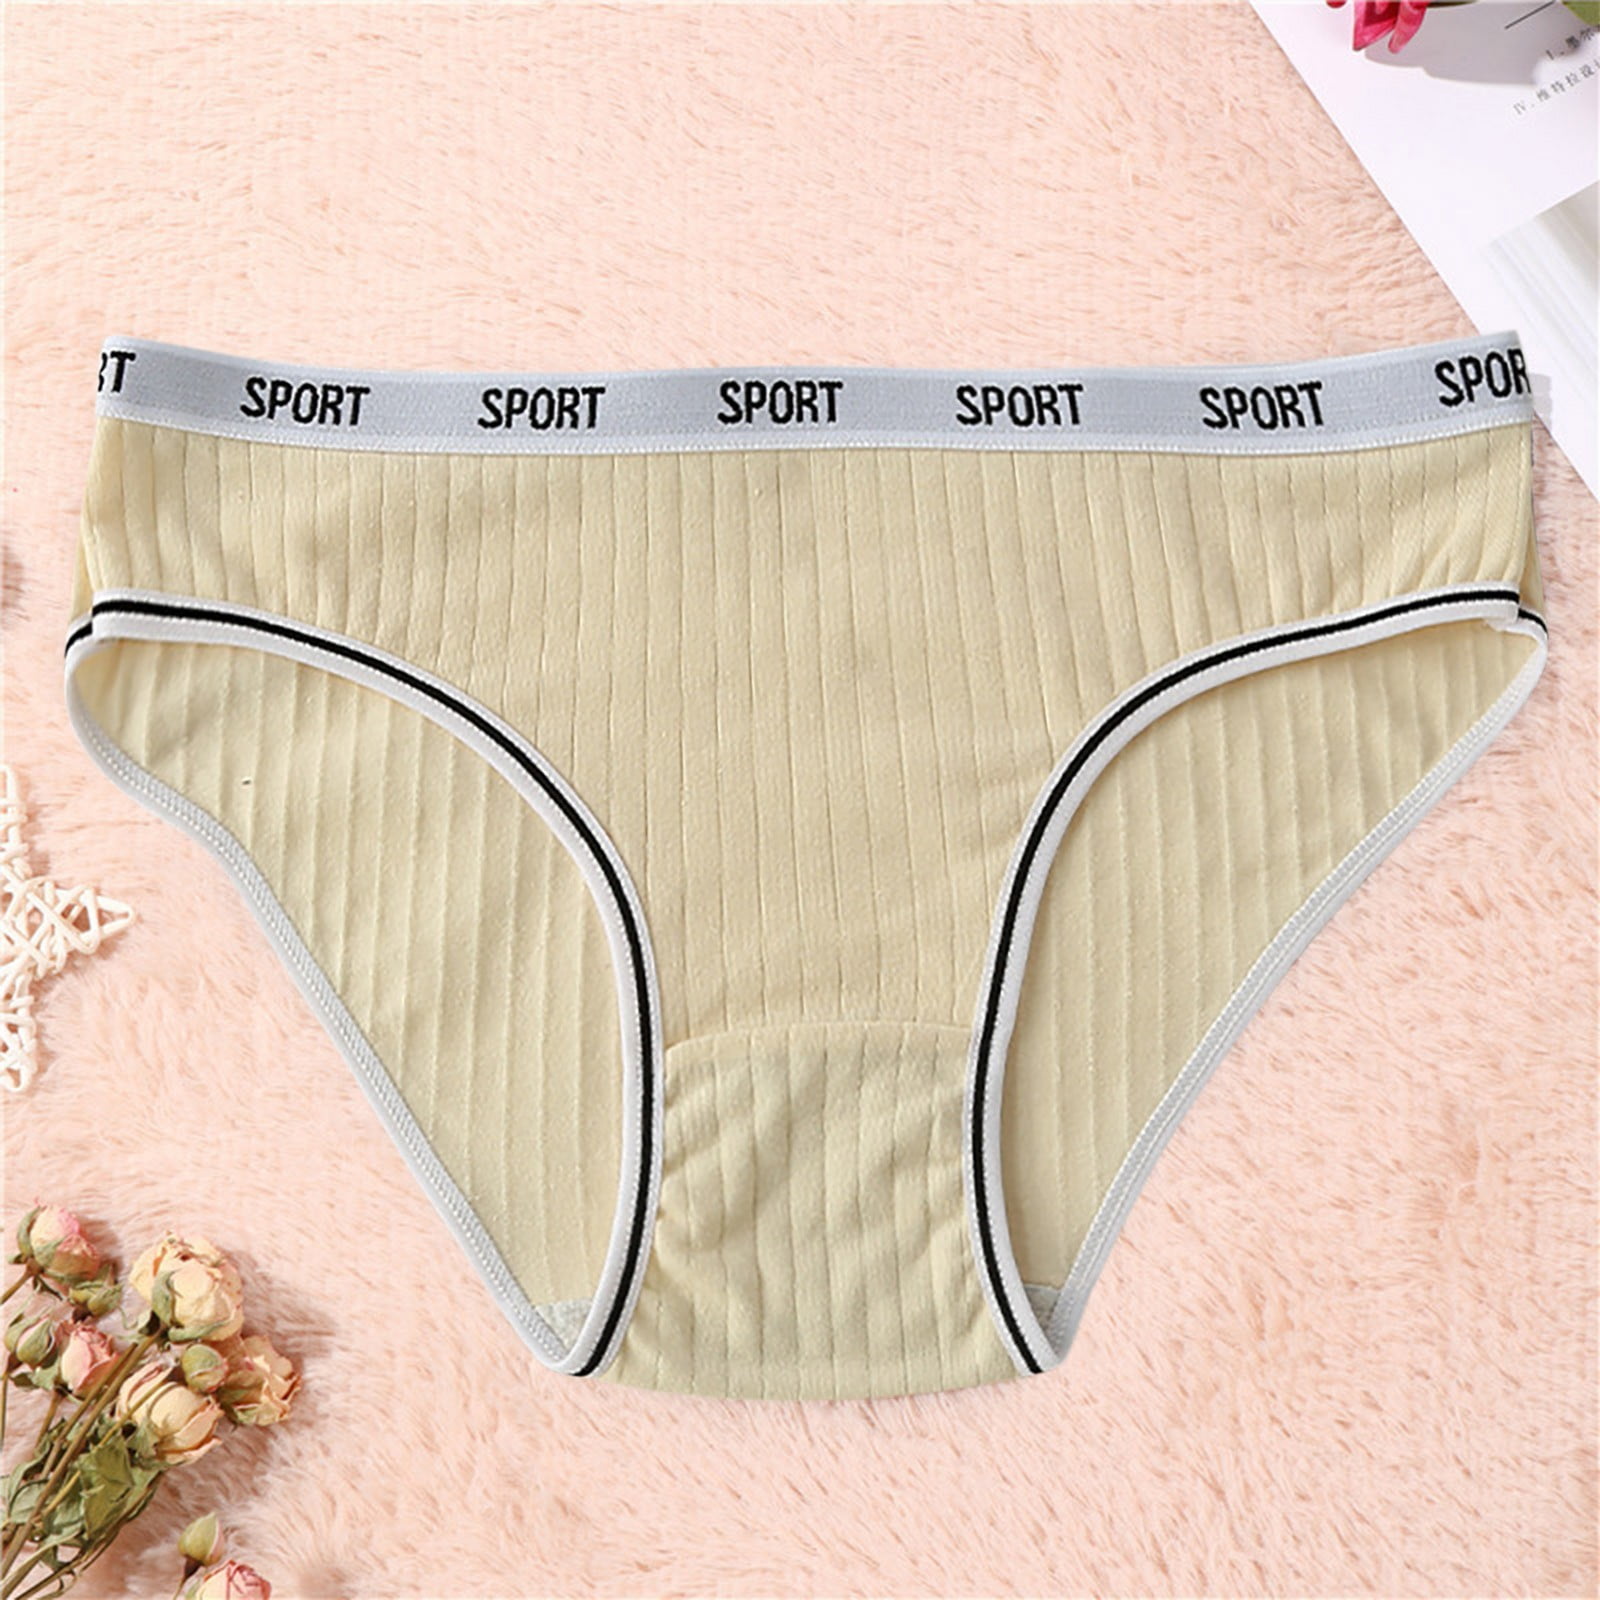 CAICJ98 Lingerie for Women Women Panties Breathable Comfortable Cotton  Bottom Panties Seamless Glare Triangle Panties,A